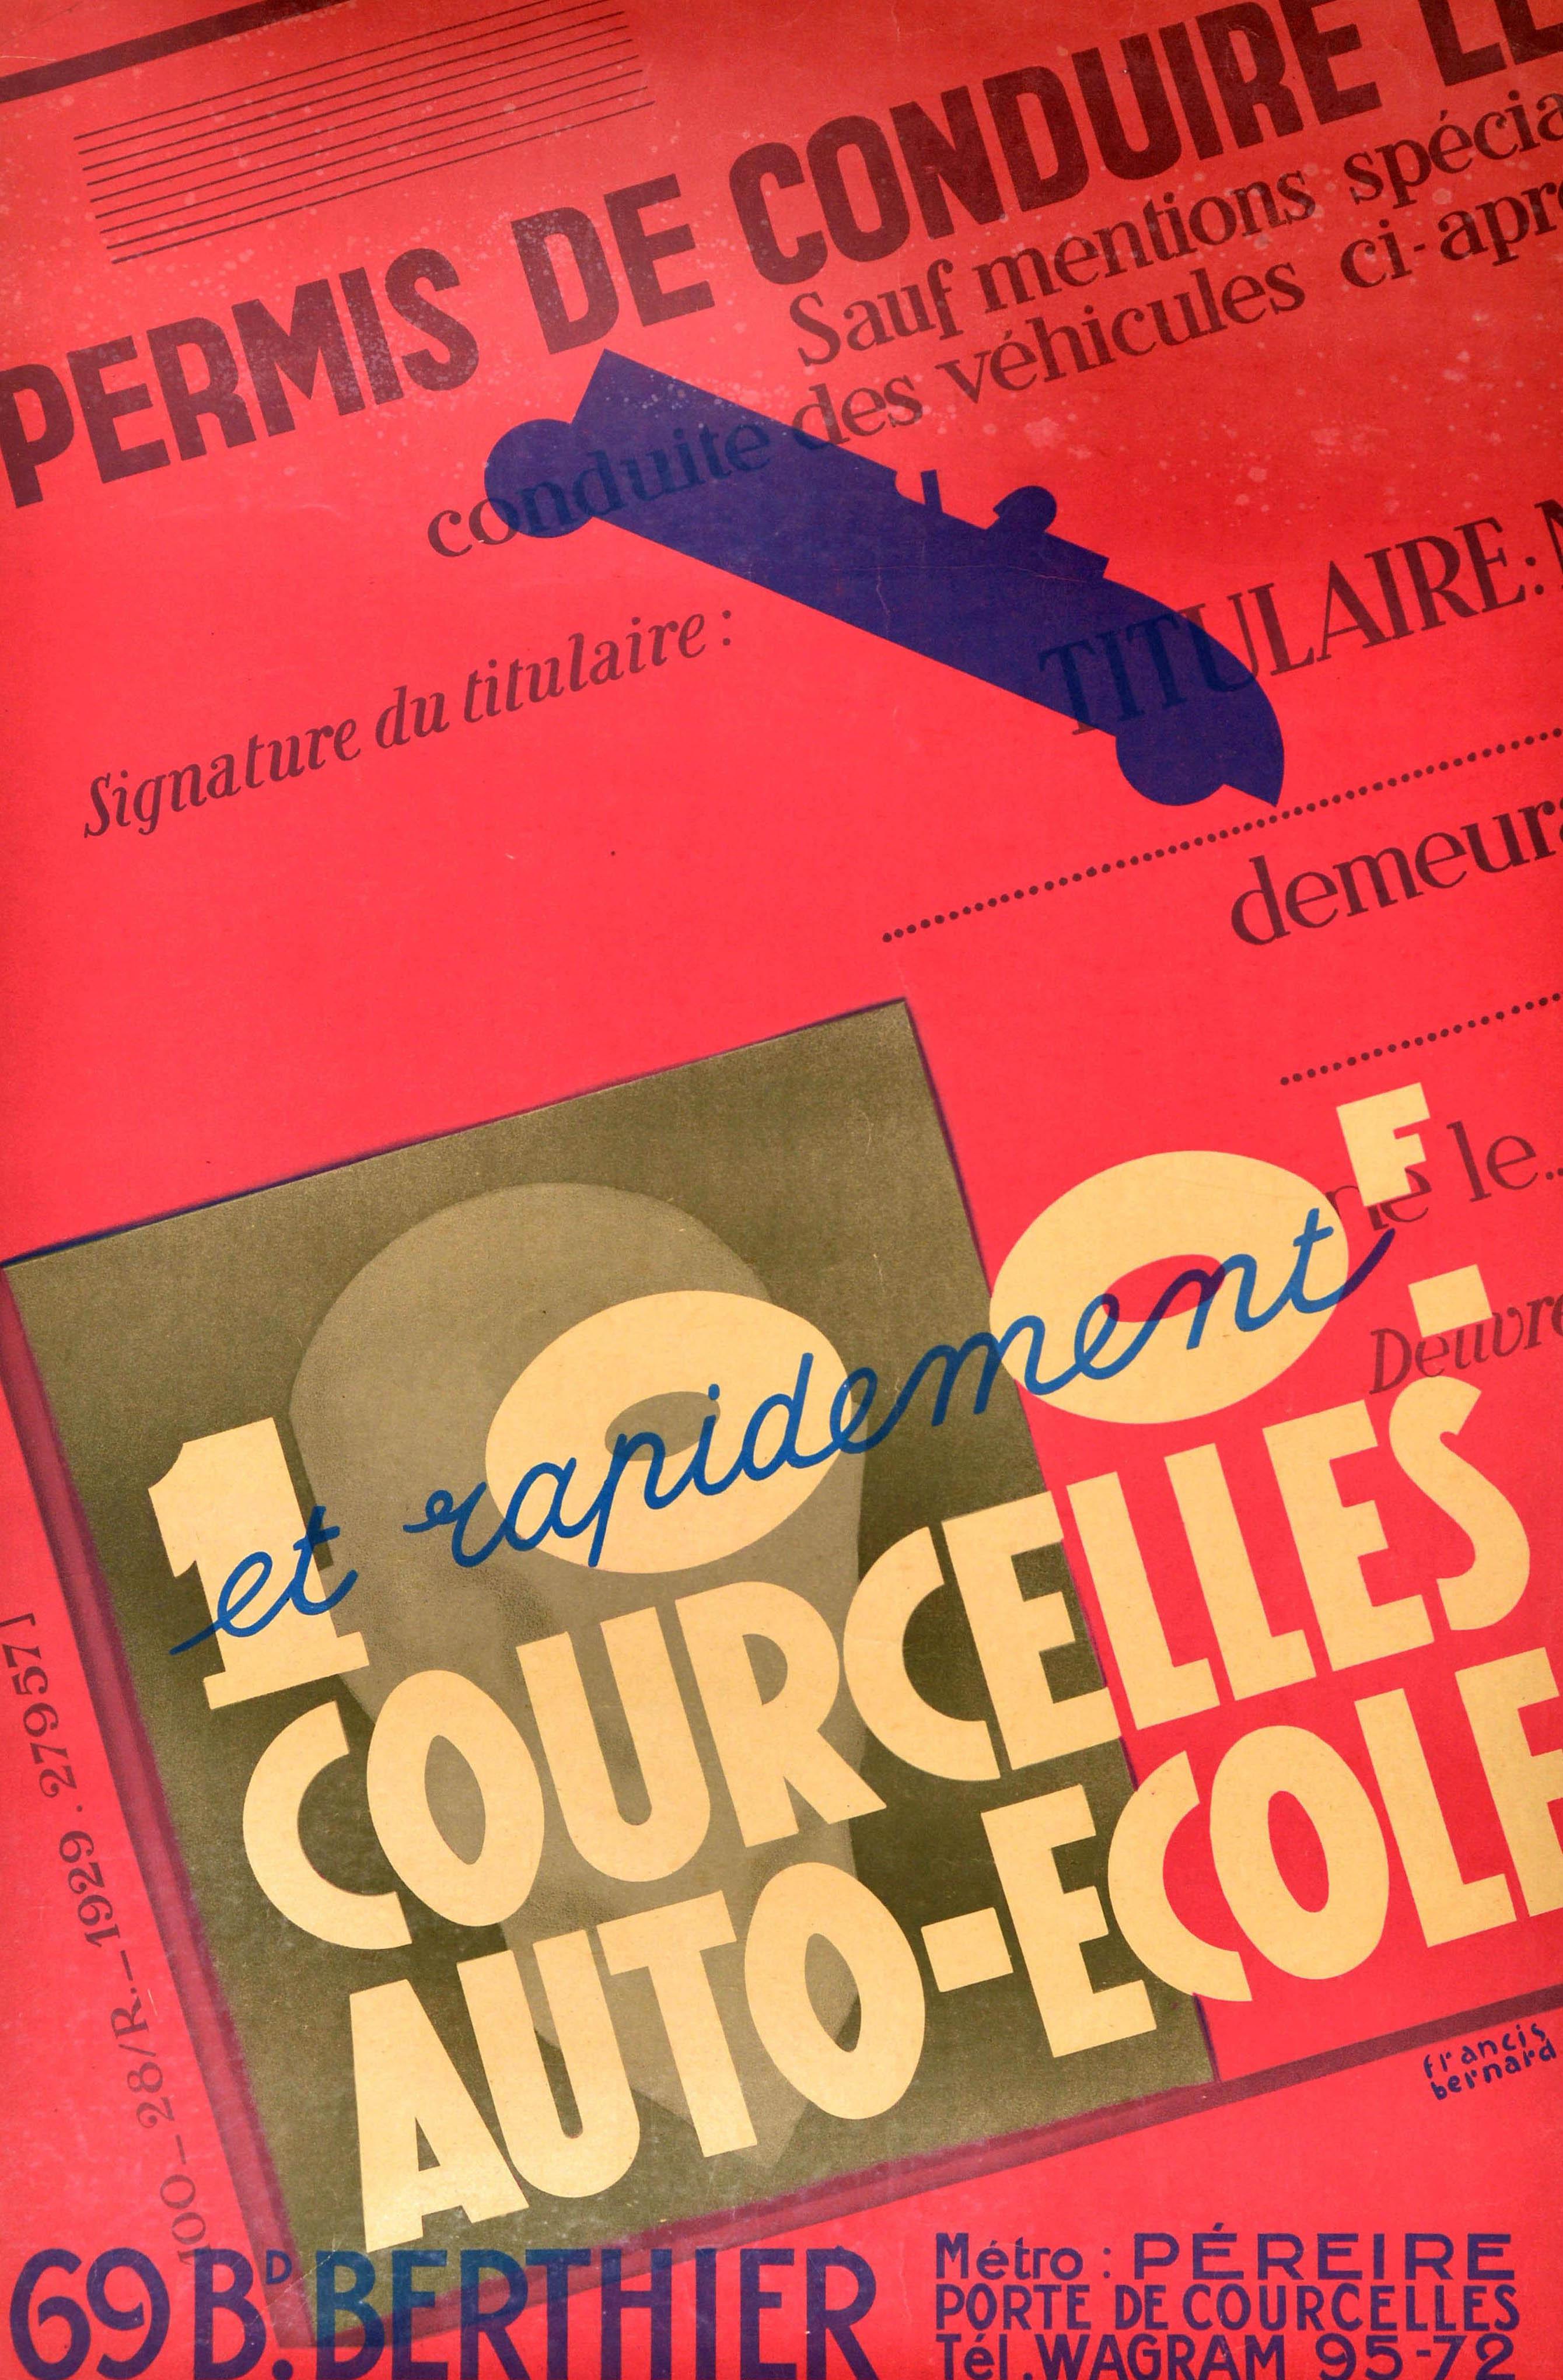 Original vintage advertising poster - Permis de Conduire 100F Courcelles Auto Ecole 69 Boulevard Berthier / Driving licence 100 Francs Courcelles Driving School - featuring an Art Deco design of a driver's license with a silhouette image of a driver